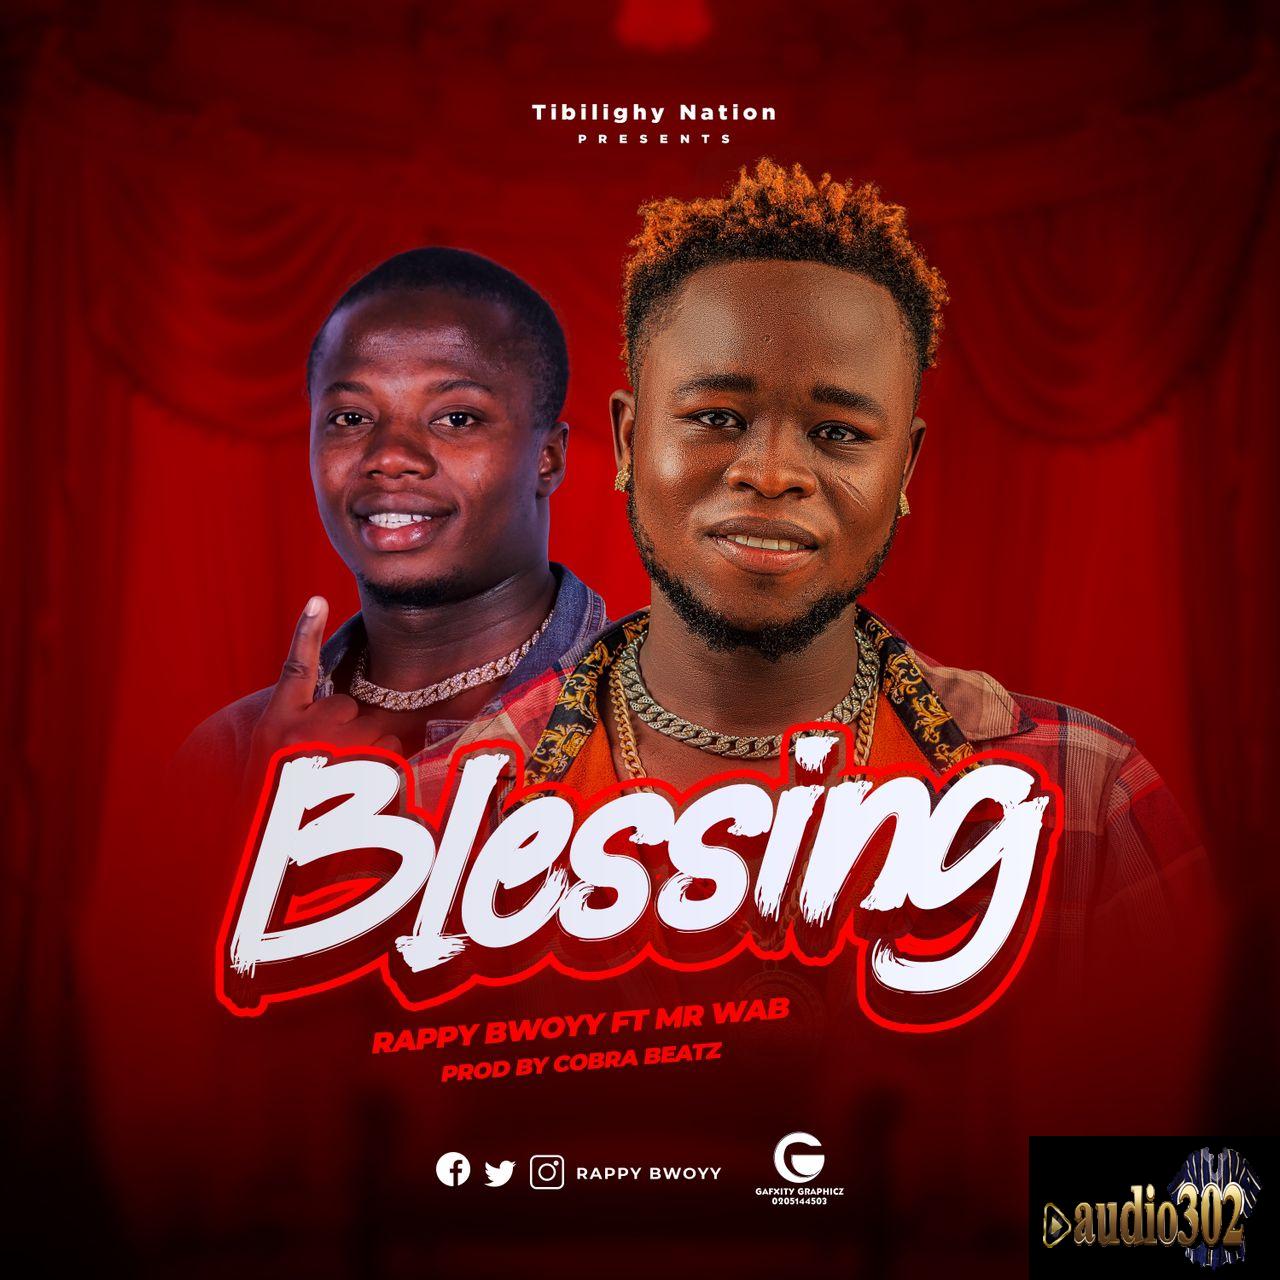 Download Rappy Bwoy ft Mr. Wab_Blessing.mp3